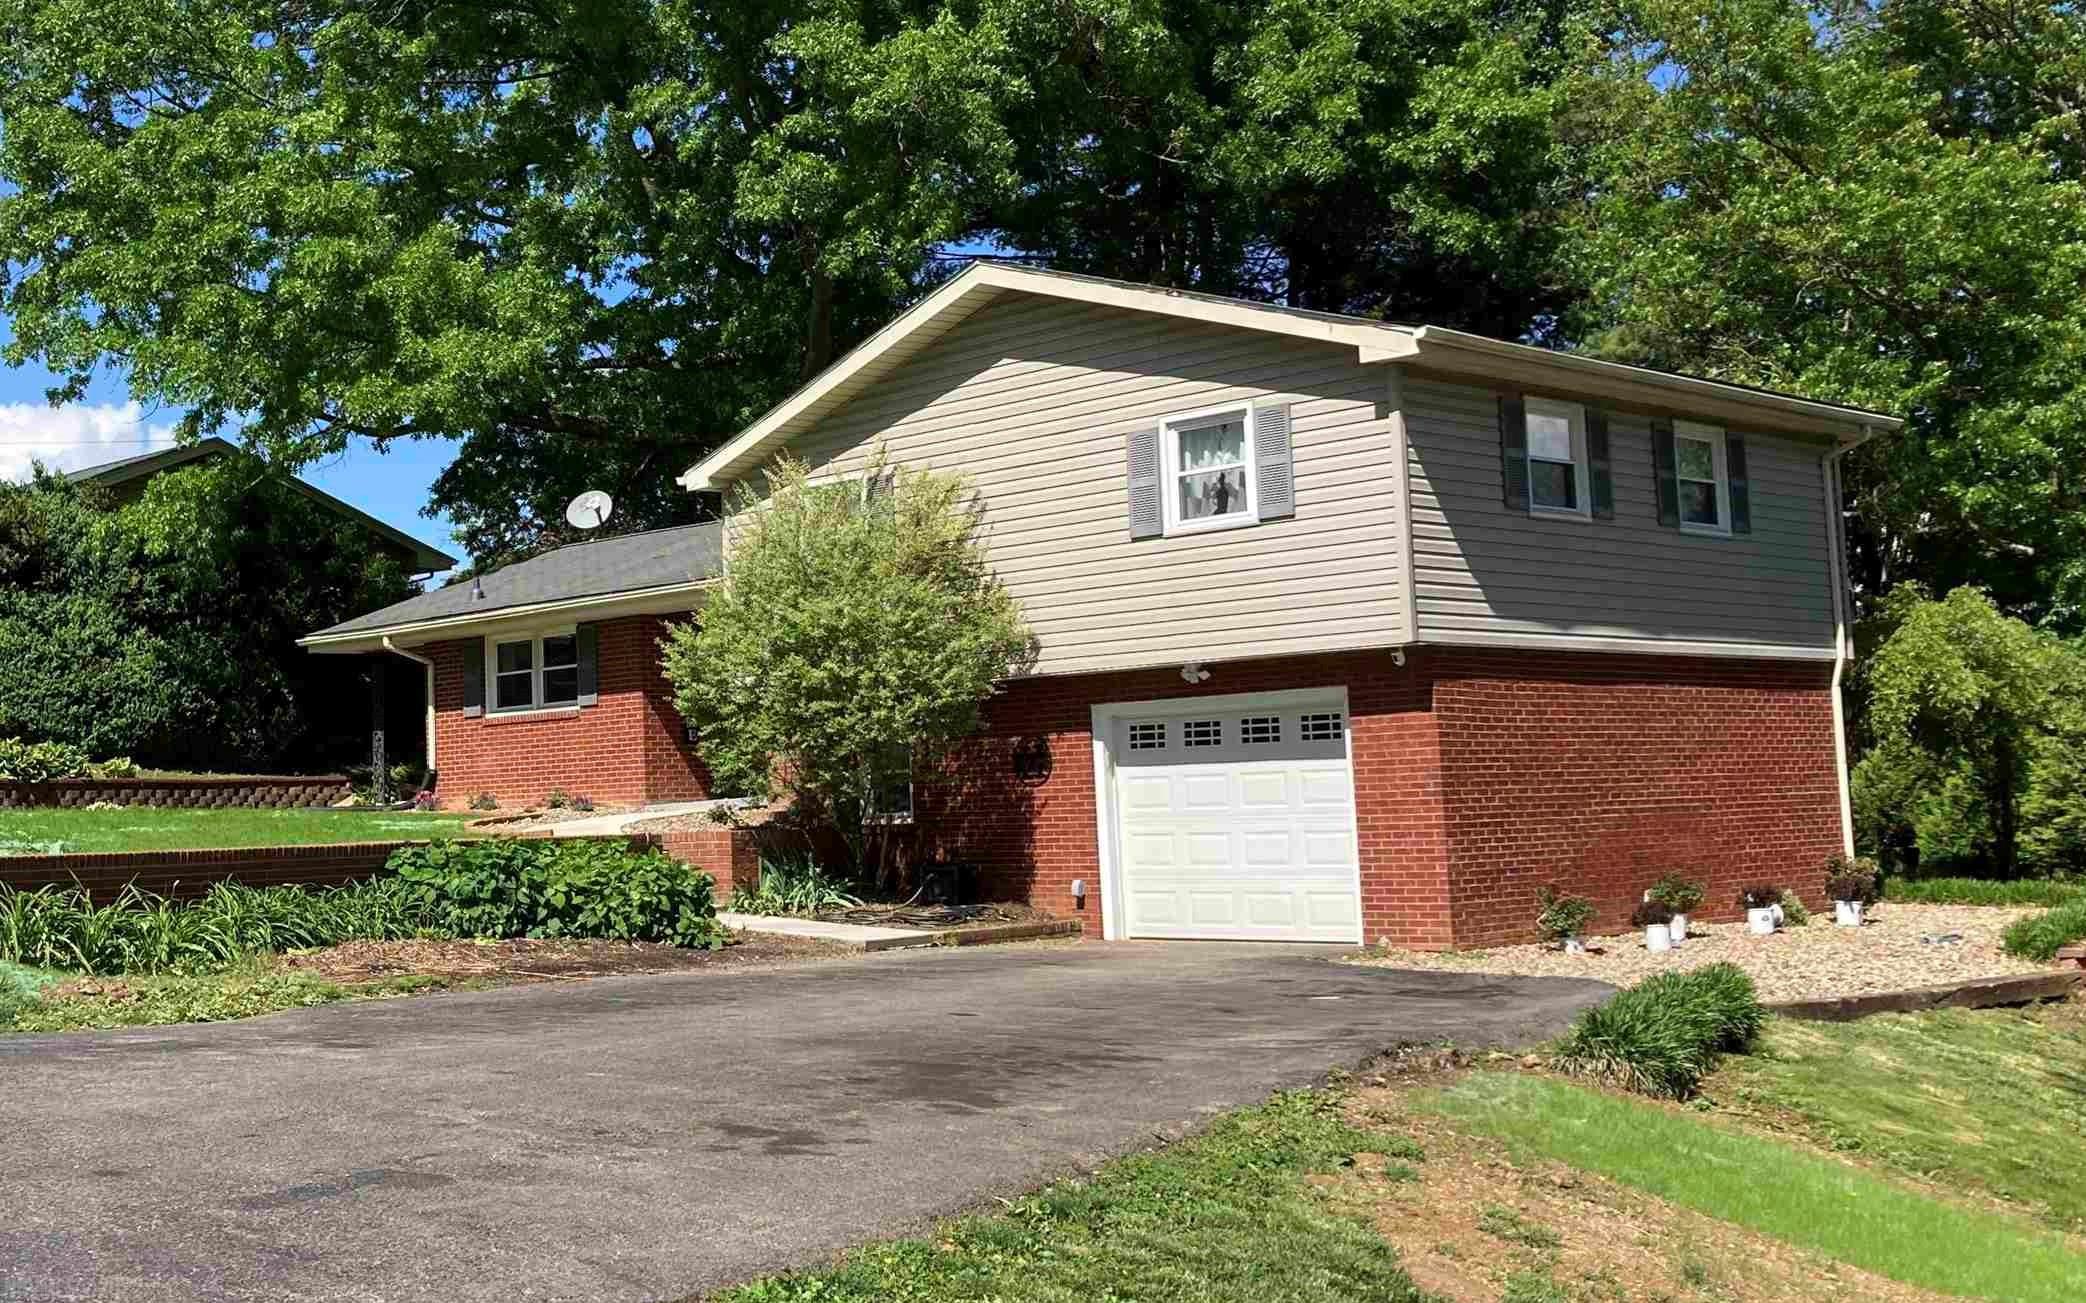 Nicely updated split level in Forest Park.  Large corner lot, patio with fire pit, and storage shed.  Large bedrooms, updates throughout, and hardwood floors.    Natural gas service.